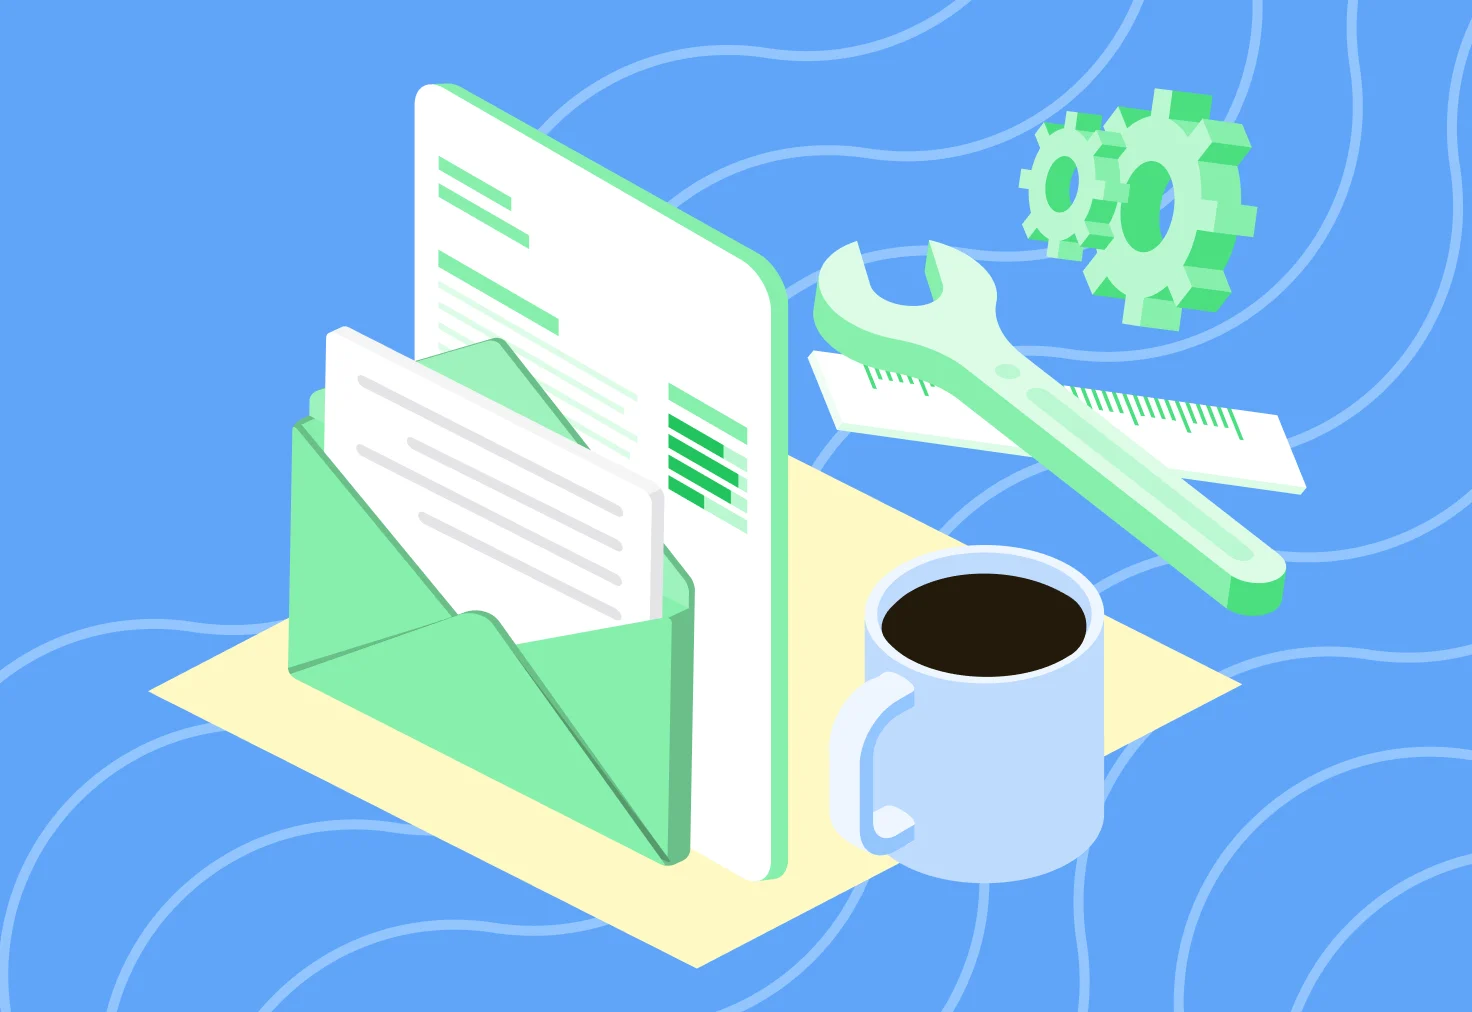 How to Use Cover Letter Templates in Google Docs Like a Pro